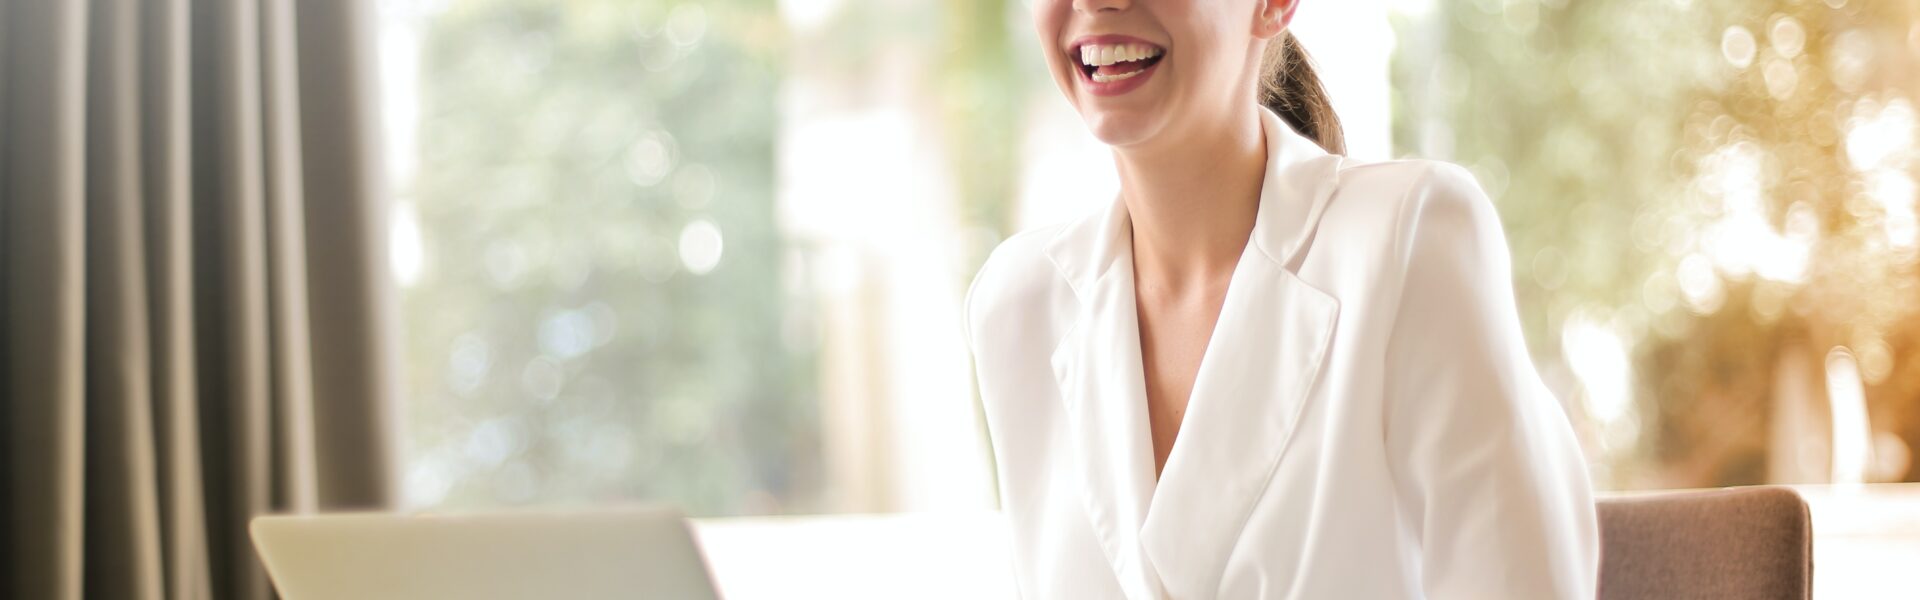 Smiling woman considering making a career change